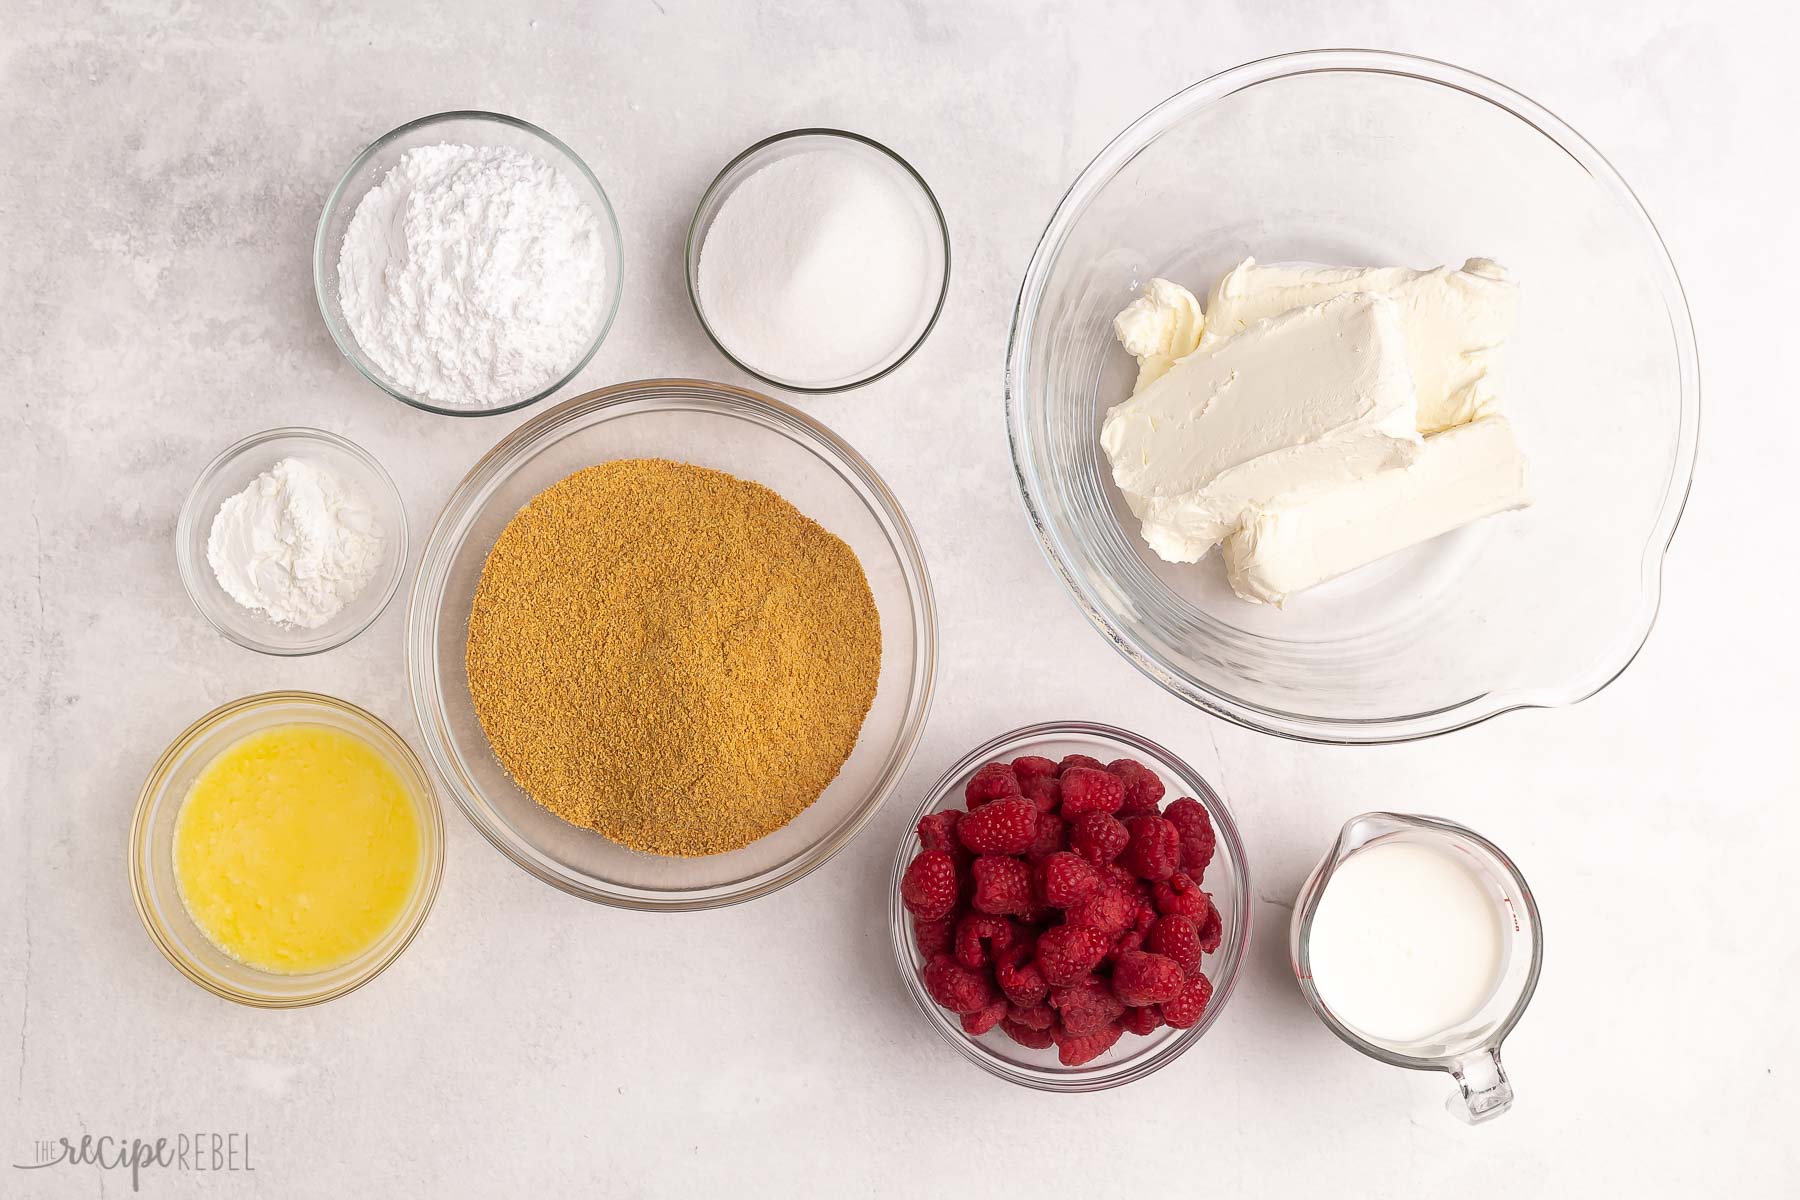 ingredients needed for no bake raspberry cheesecake.